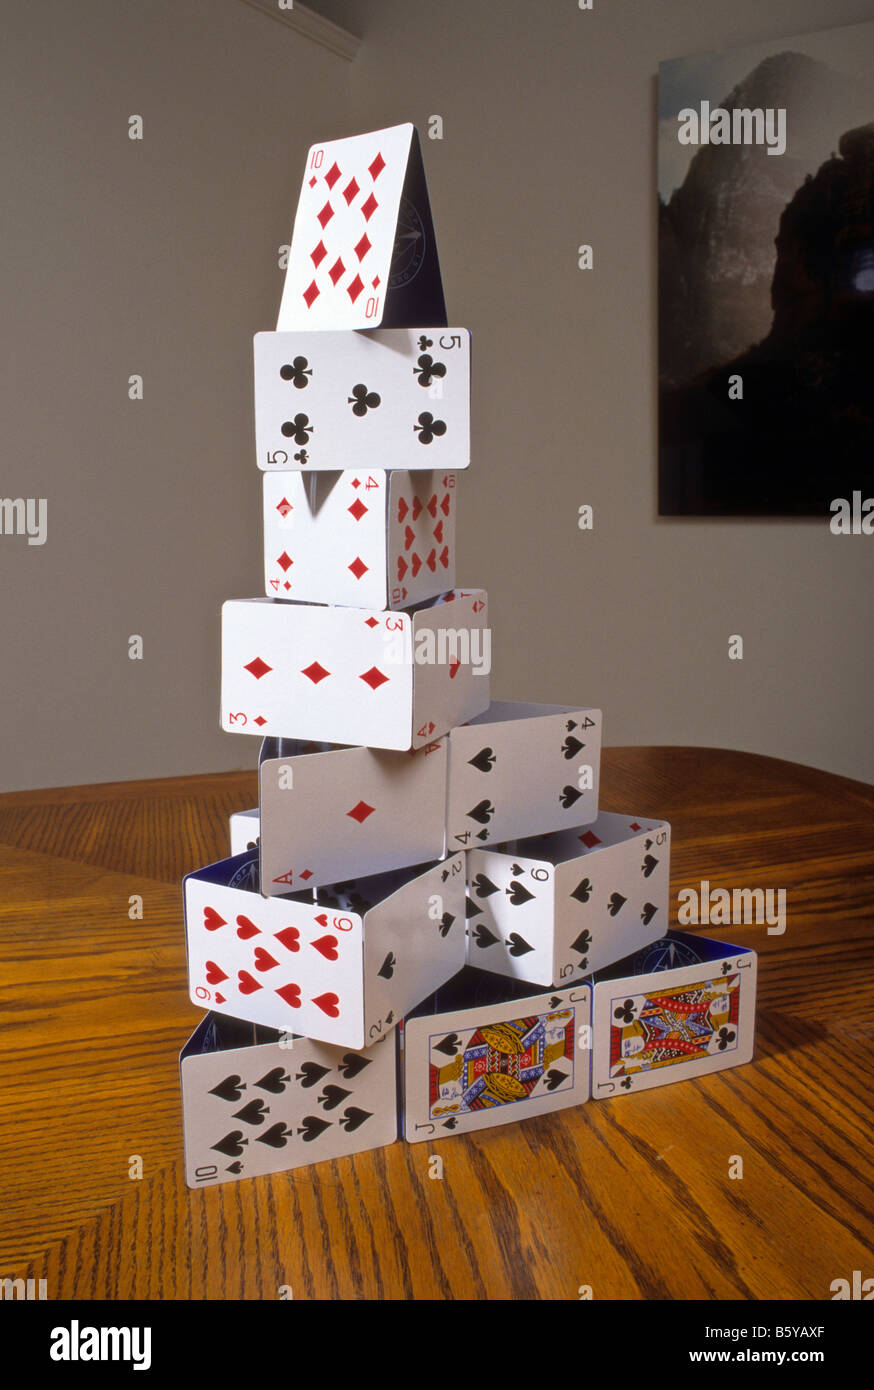 World Record Card Houses: Literally taking your playing cards to the n